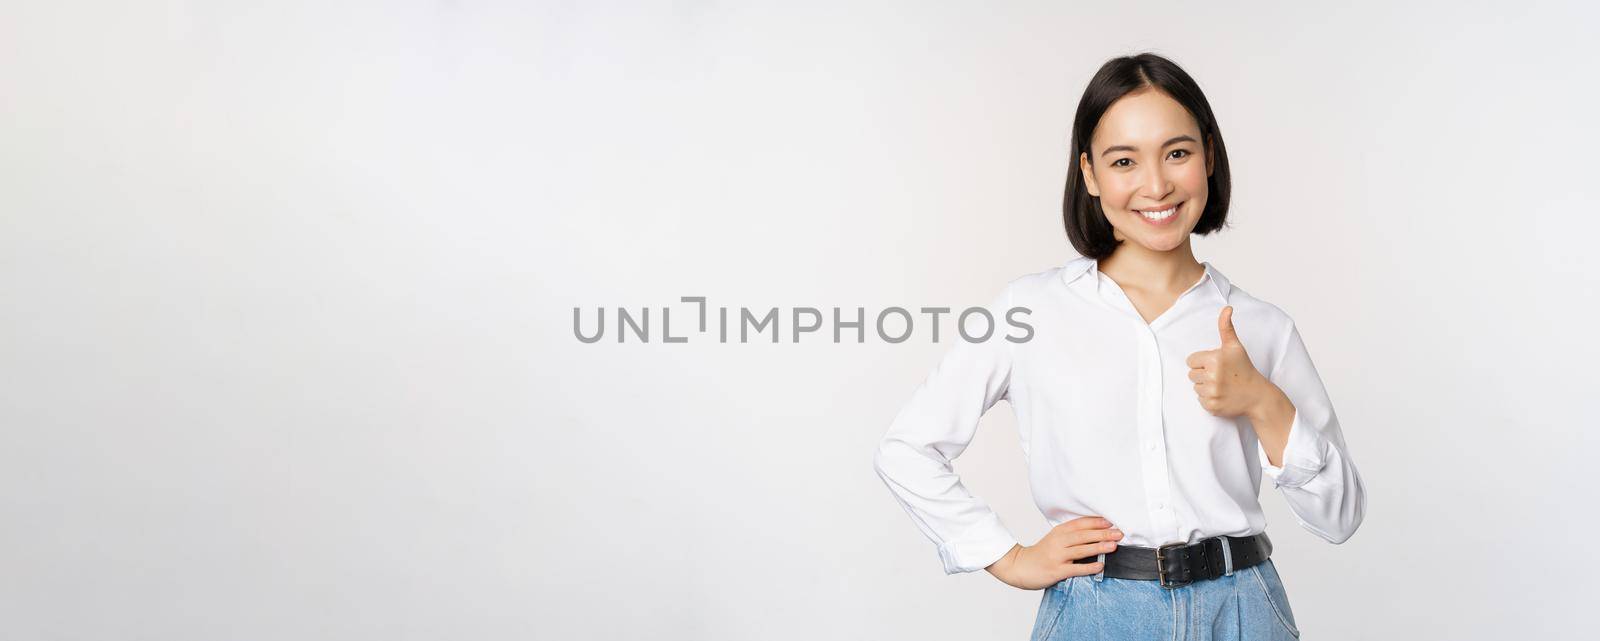 Image of confident asian woman showing thumb up in approval, recommending, like smth good, standing over white background.